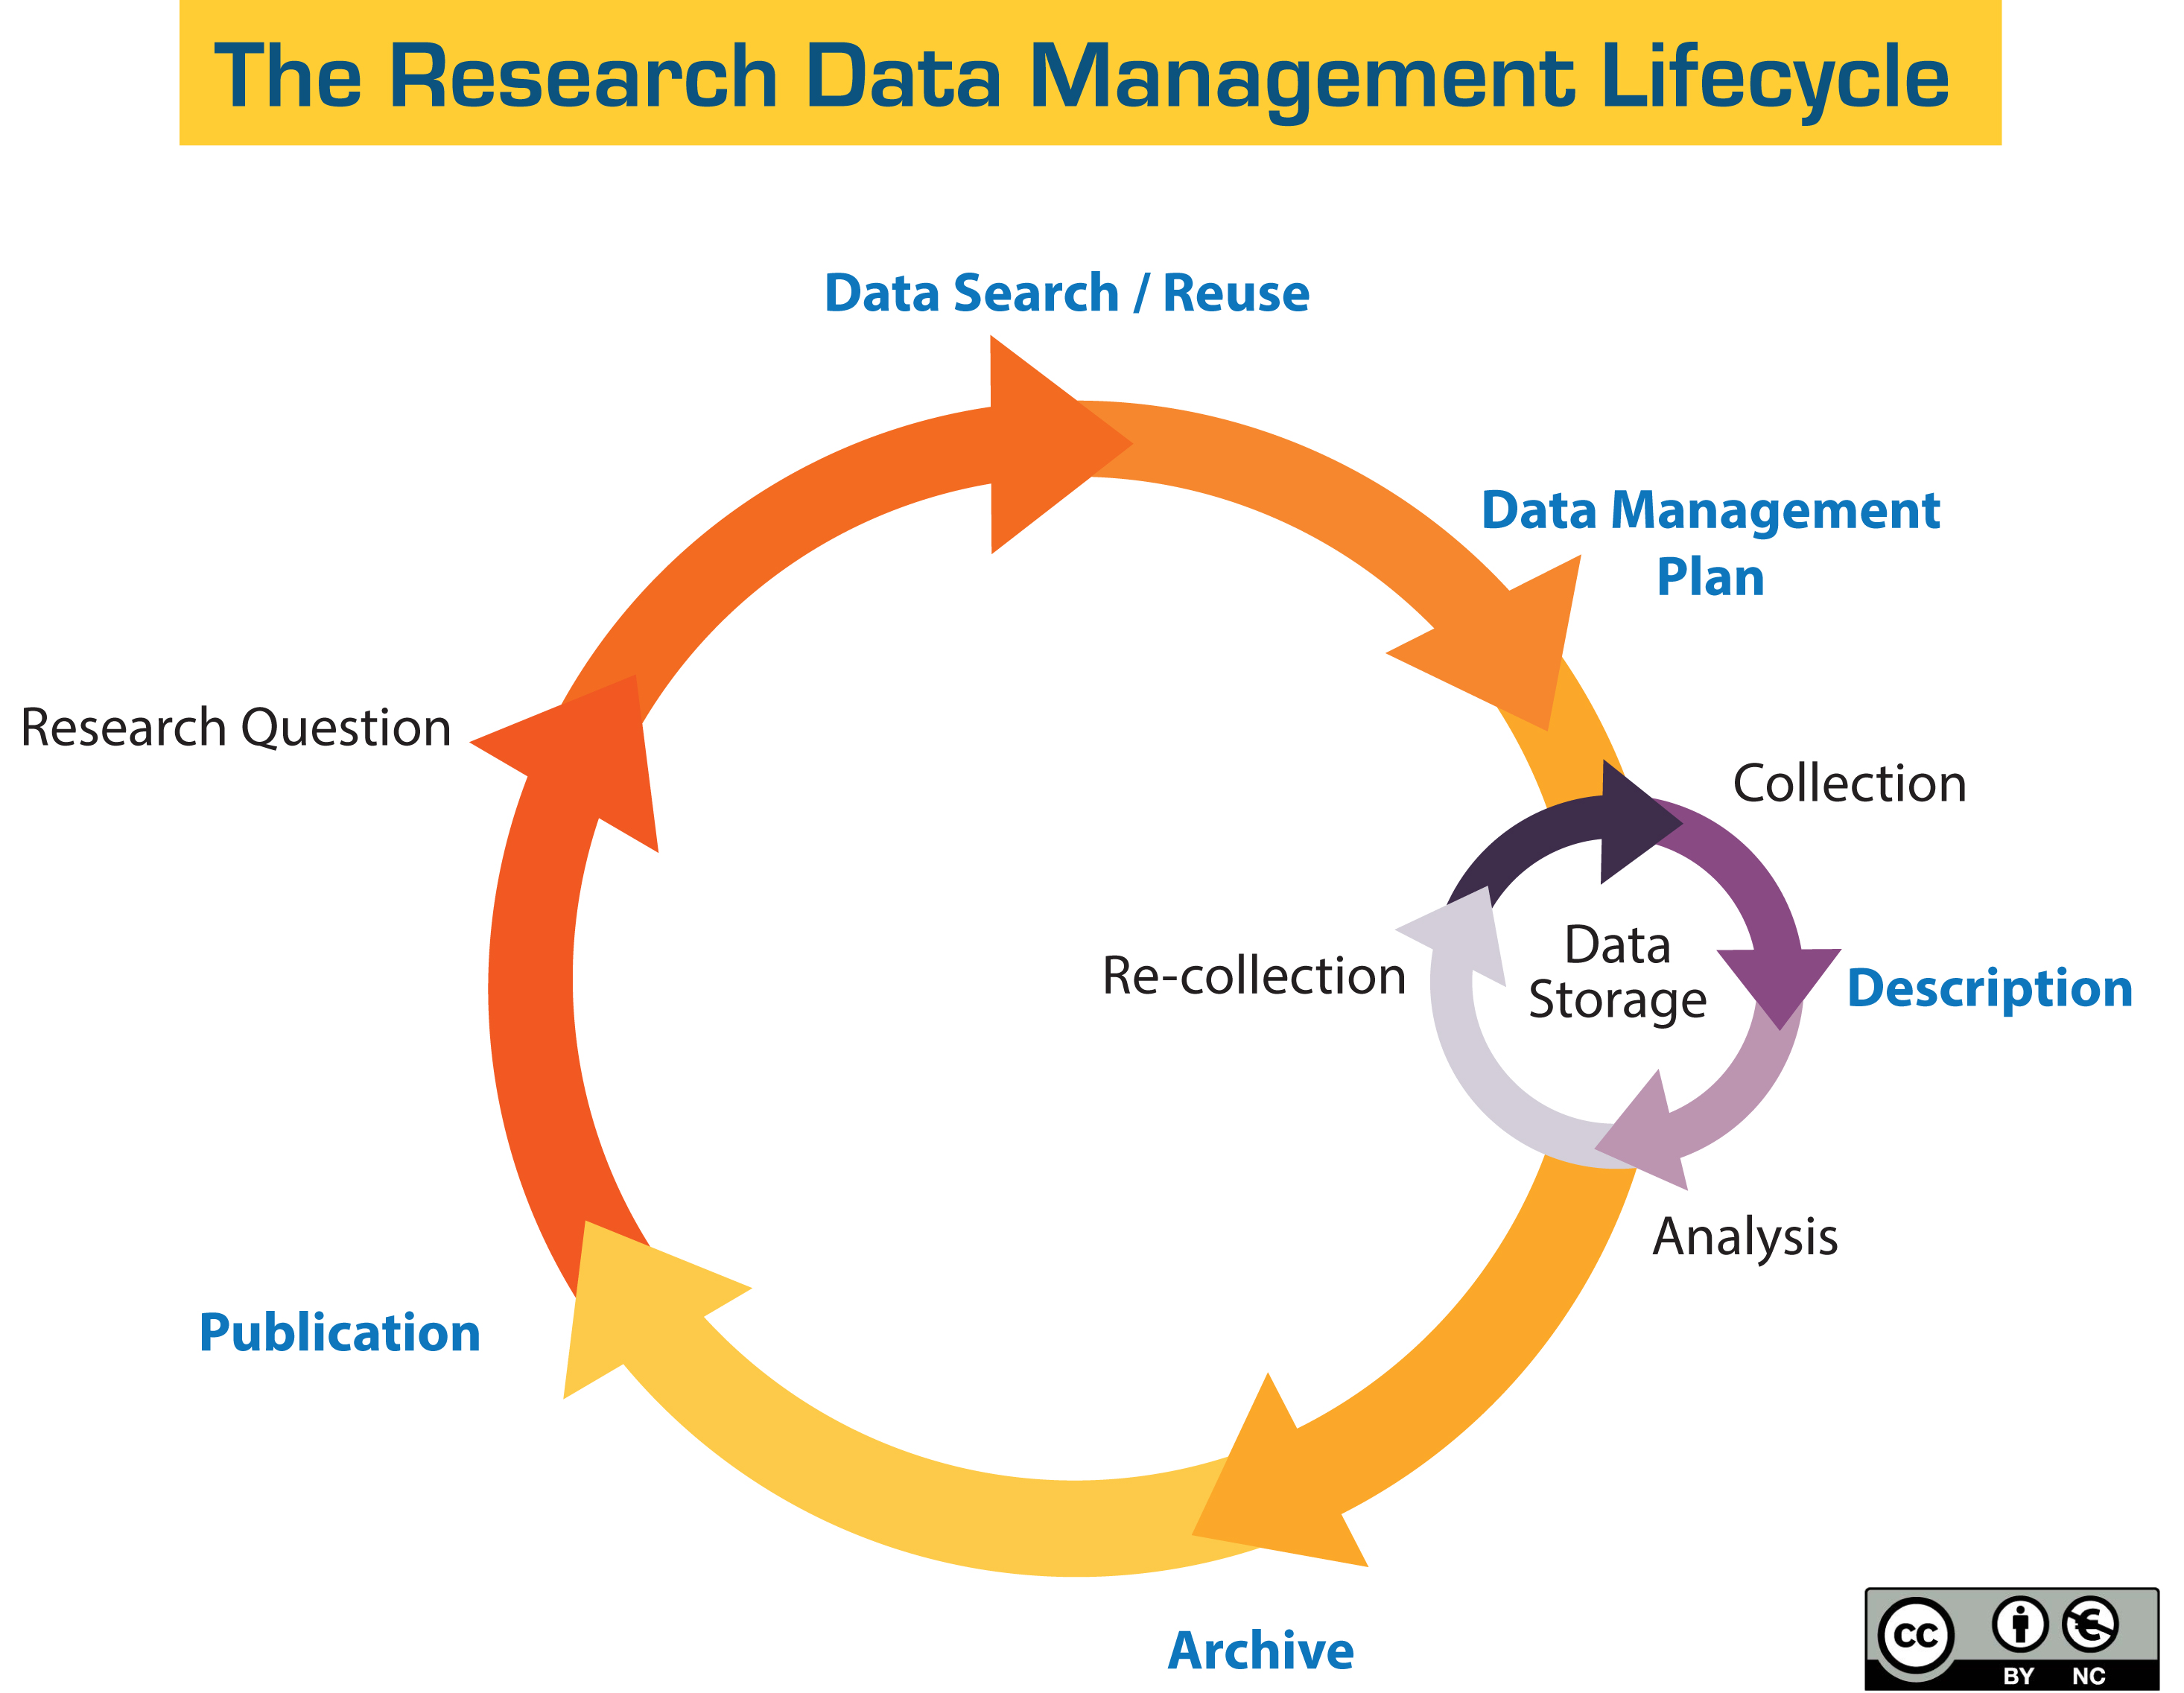 The image shows a cycle illustrating the research data life cycle consisting of the planning phase, active phase and archiving phase